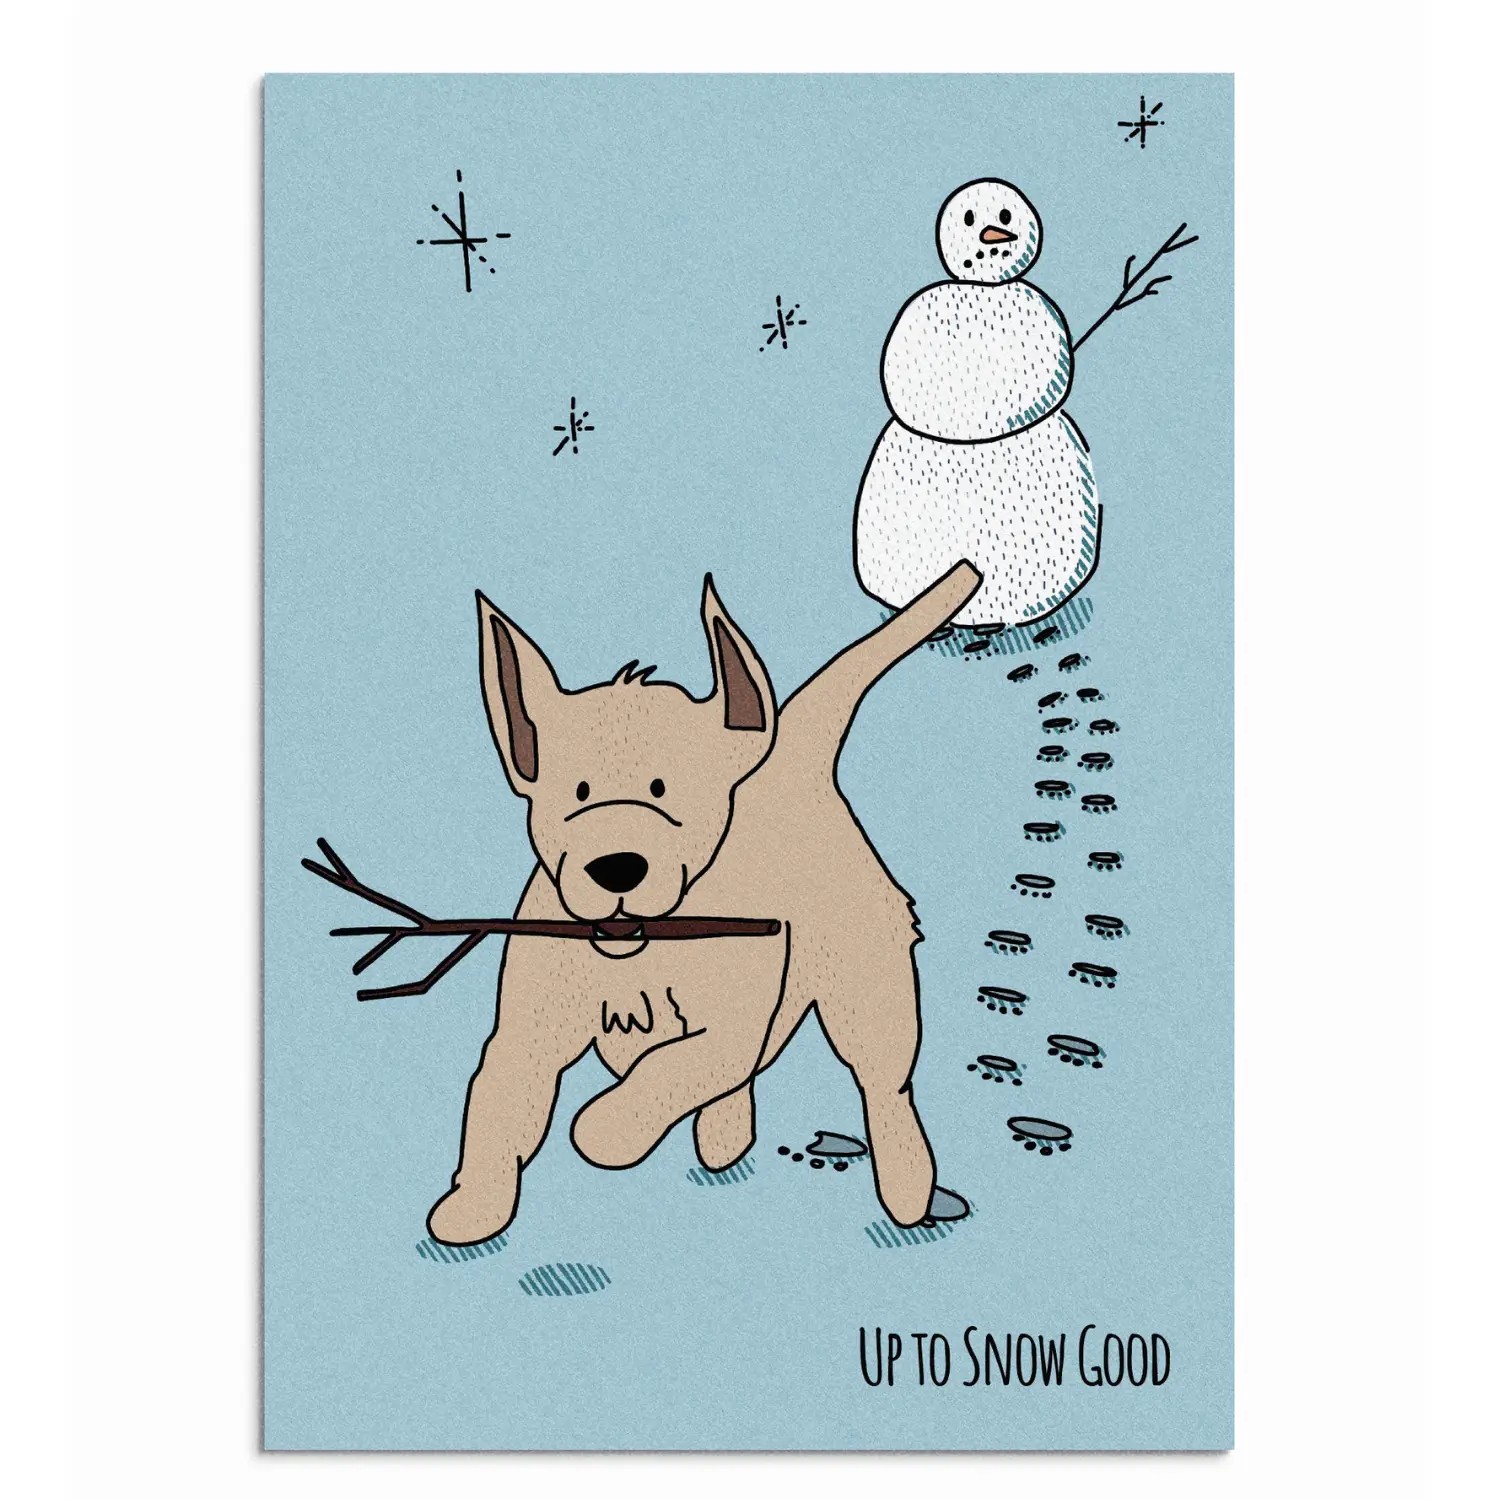 Poochie Post Edible Greeting Card For Dogs - Up to Snow Good